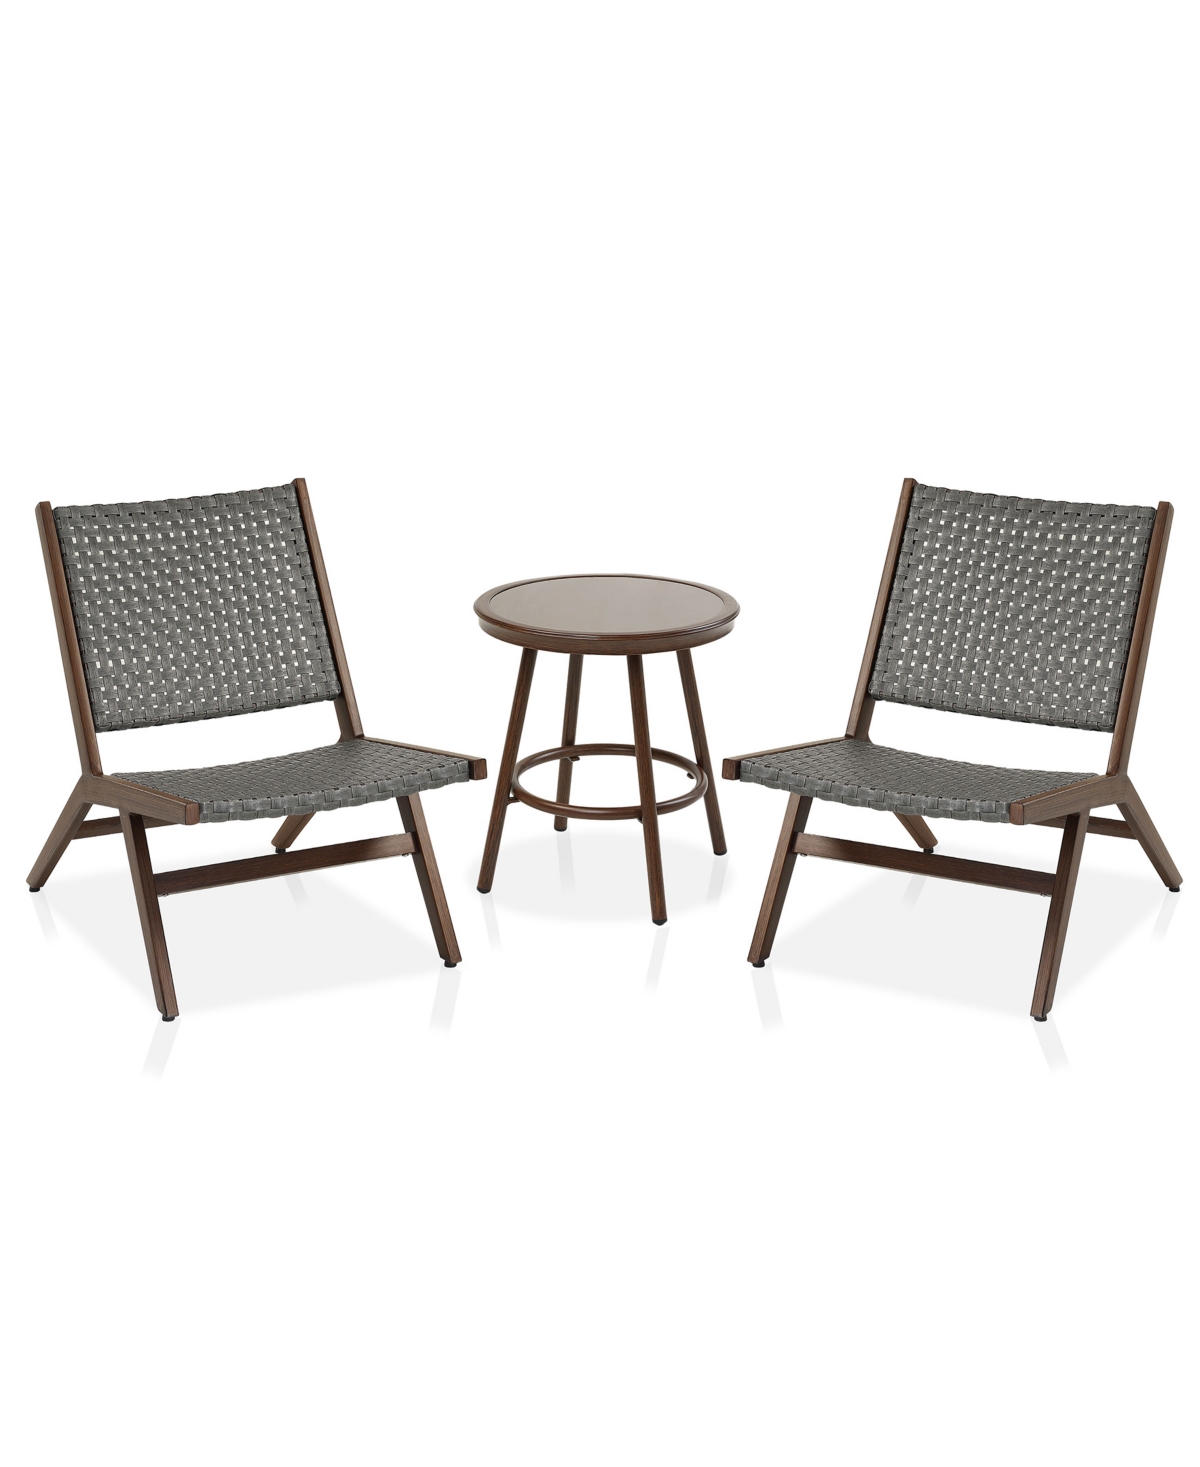 Furniture Of America Adagio Chair And Table 3 Piece Set In Dark Gray